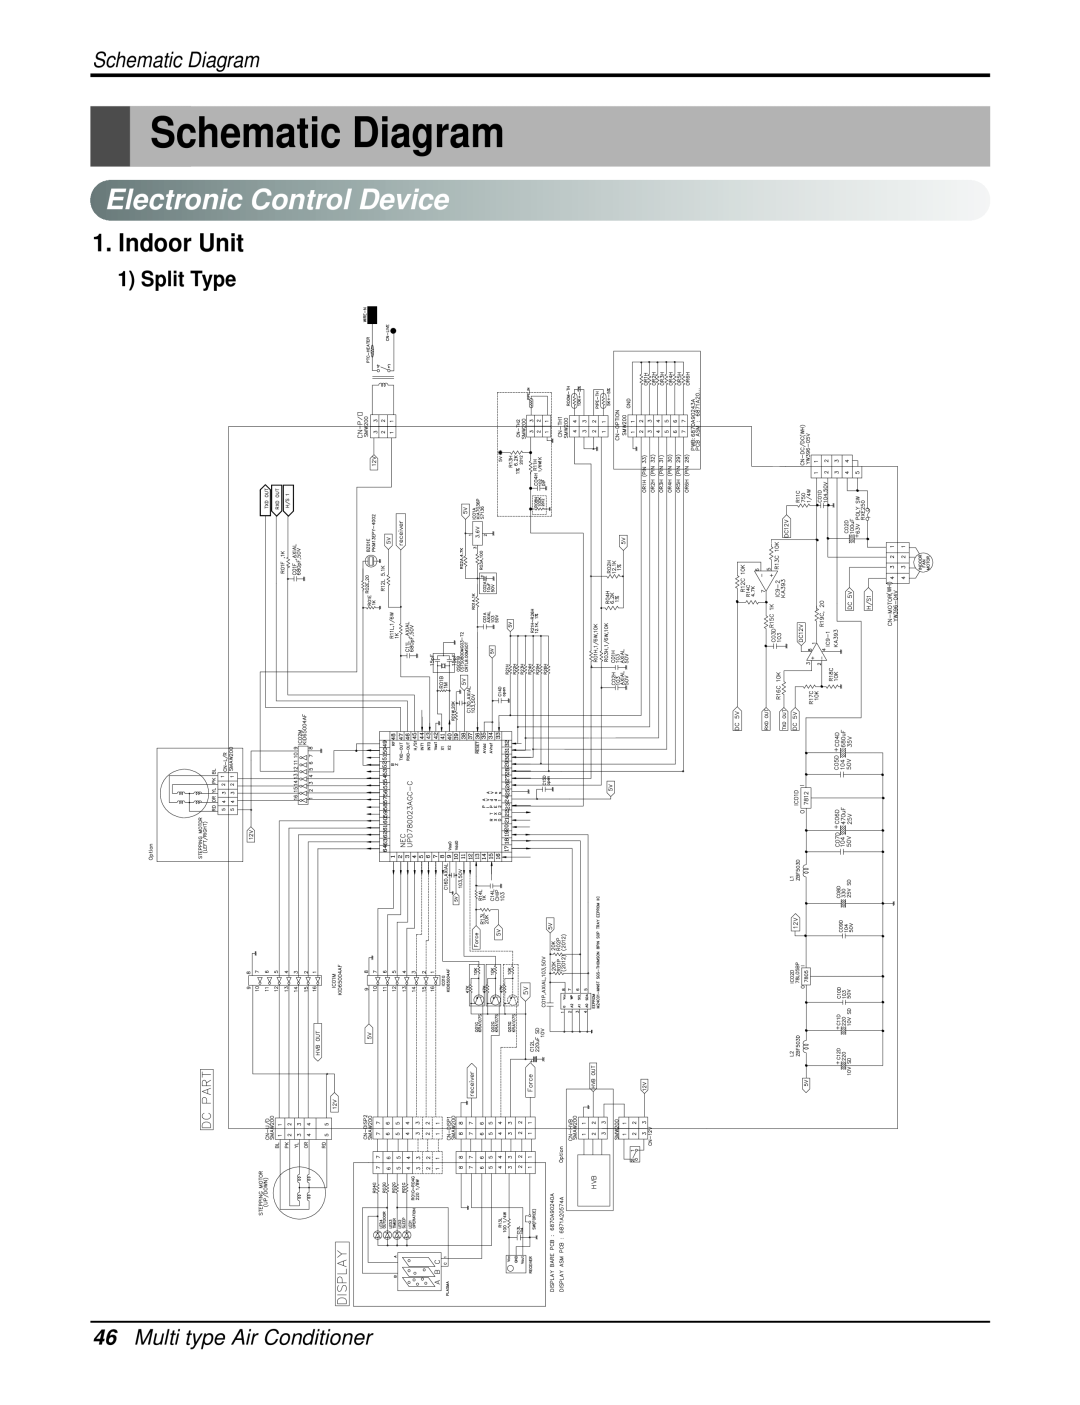 Heat Controller DMH18DB-1 manual Schematic Diagram, ElectronicControlDevice, Indoor Unit, 46Multi type Air Conditioner 